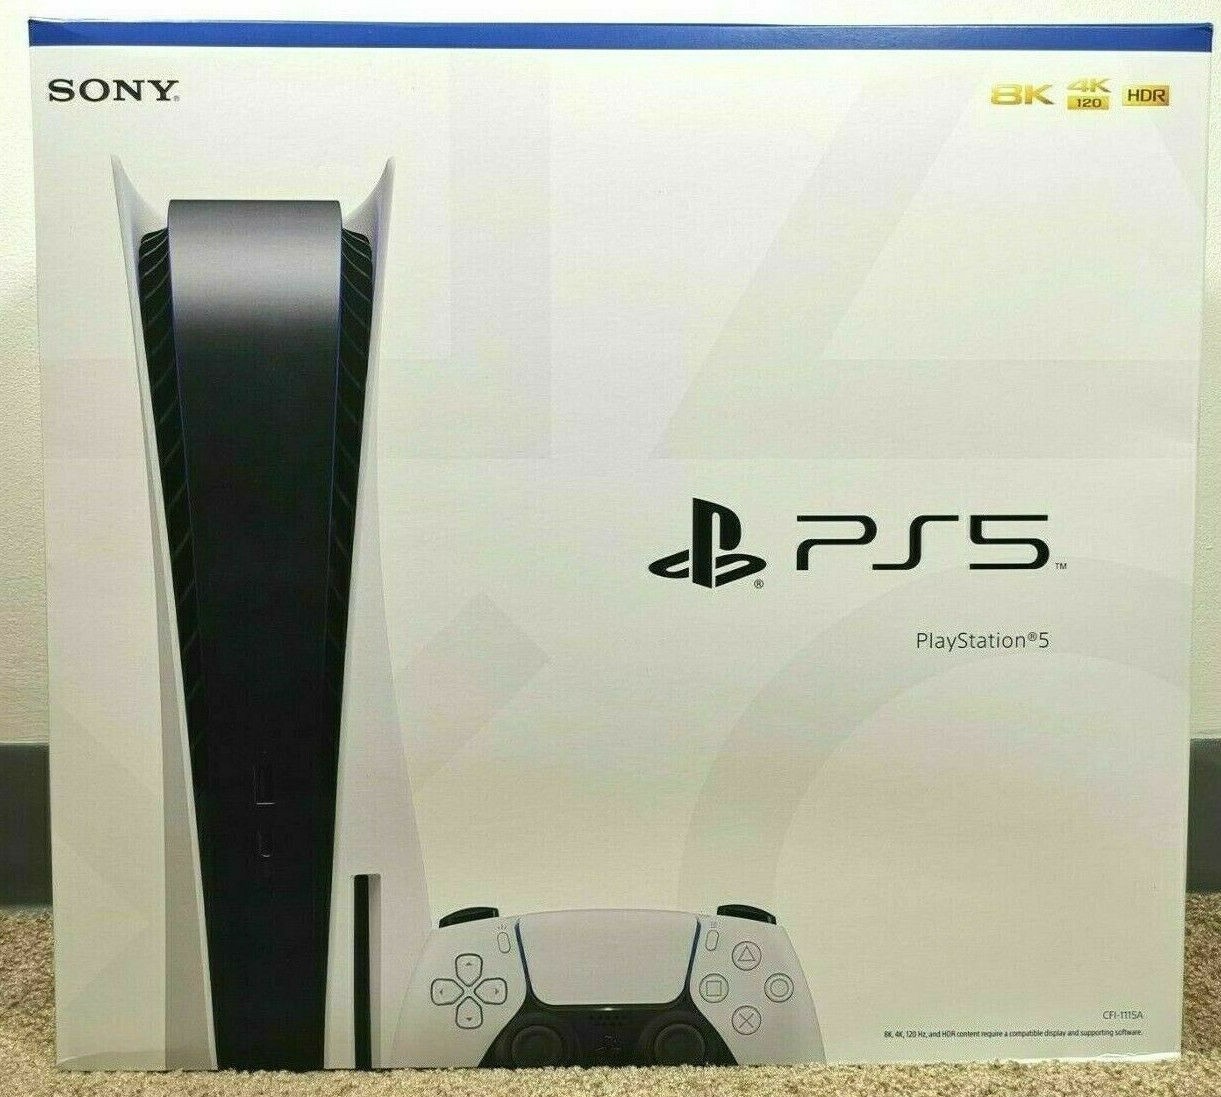 NEW SEALED Playstation PS 5 Disc Edition Console